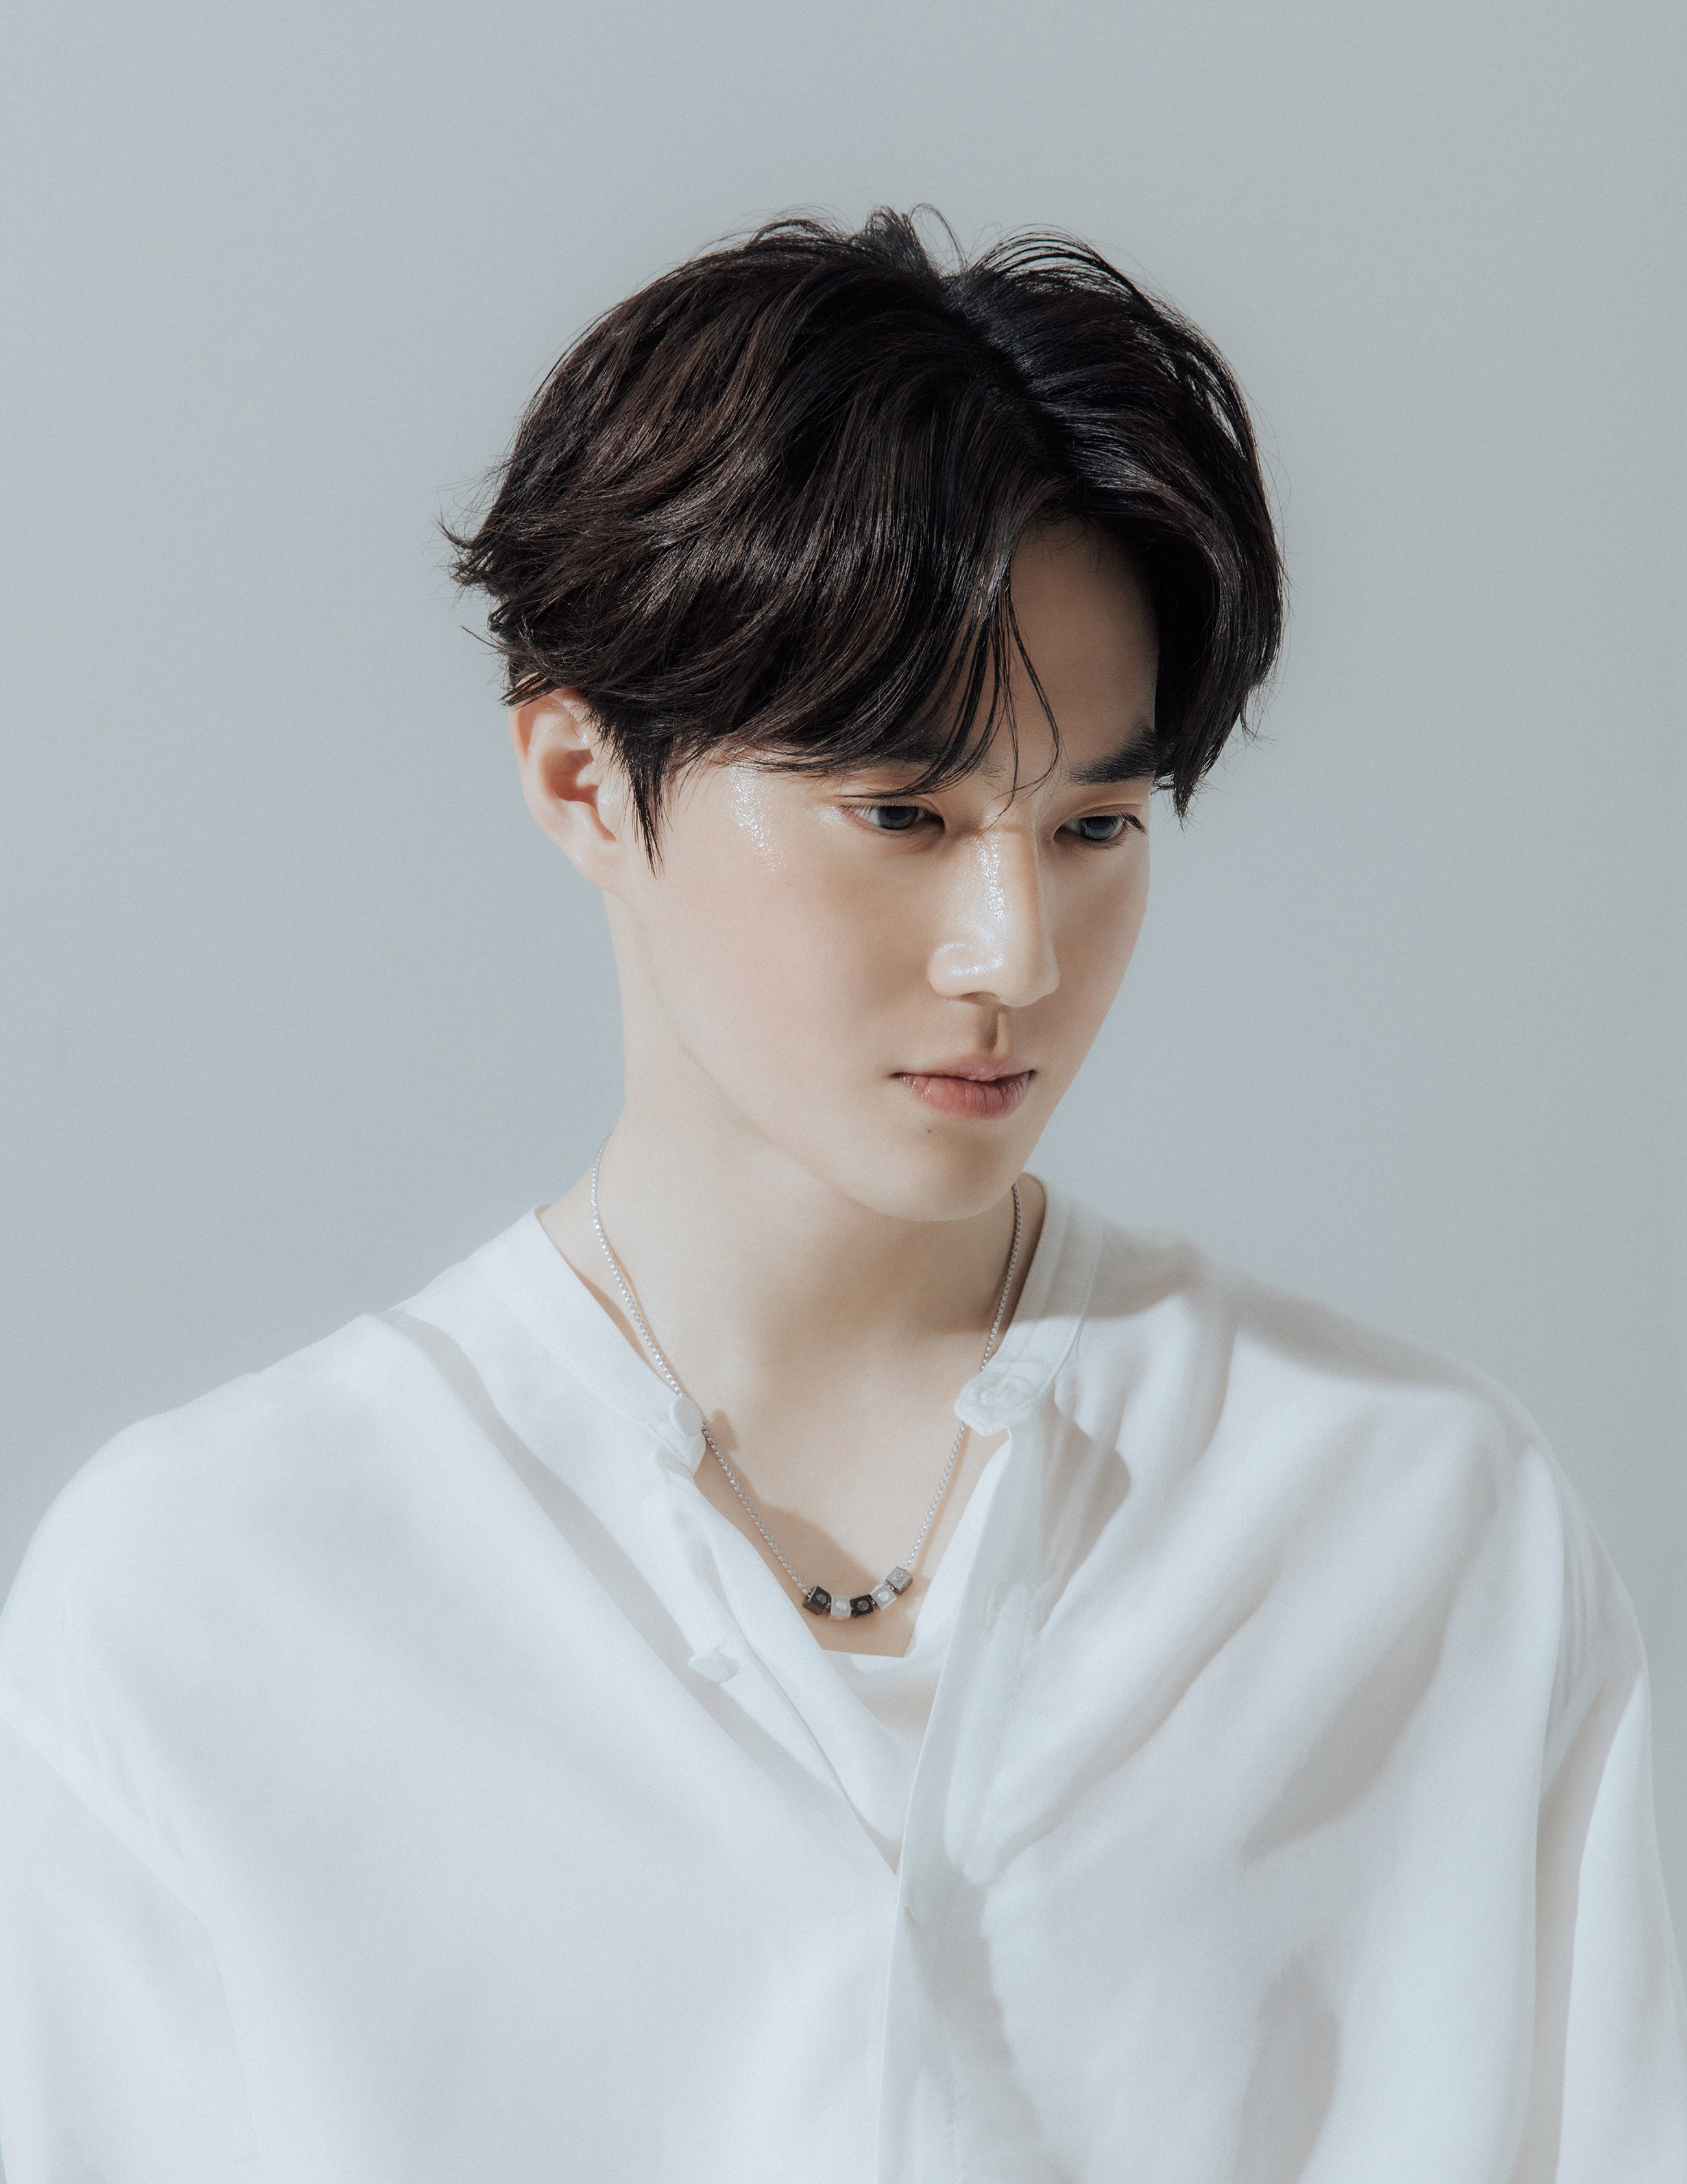 EXO Suho participated in the concept of YG Entertainment and lyrics of the first Solo album, and announced the Madewell 1937 album.Suhos first mini album Self-Portrait, released on the 30th, contains a total of six songs in a lyrical atmosphere, including the title song Lets Love, a modern rock genre.In particular, Suho participates in the concept YG Entertainment as well as the whole song written on this album, and expresses the various experiences and feelings that everyone has experienced in the past 8 years after his debut in line with universal love stories that can easily sympathize with.In addition, this album has improved the perfection with the story that connects from Tracks 1 to Tracks 6, and Suho is composed of various band sound-based songs that Suho usually likes, so it is enough to feel Suhos musical sensibility.